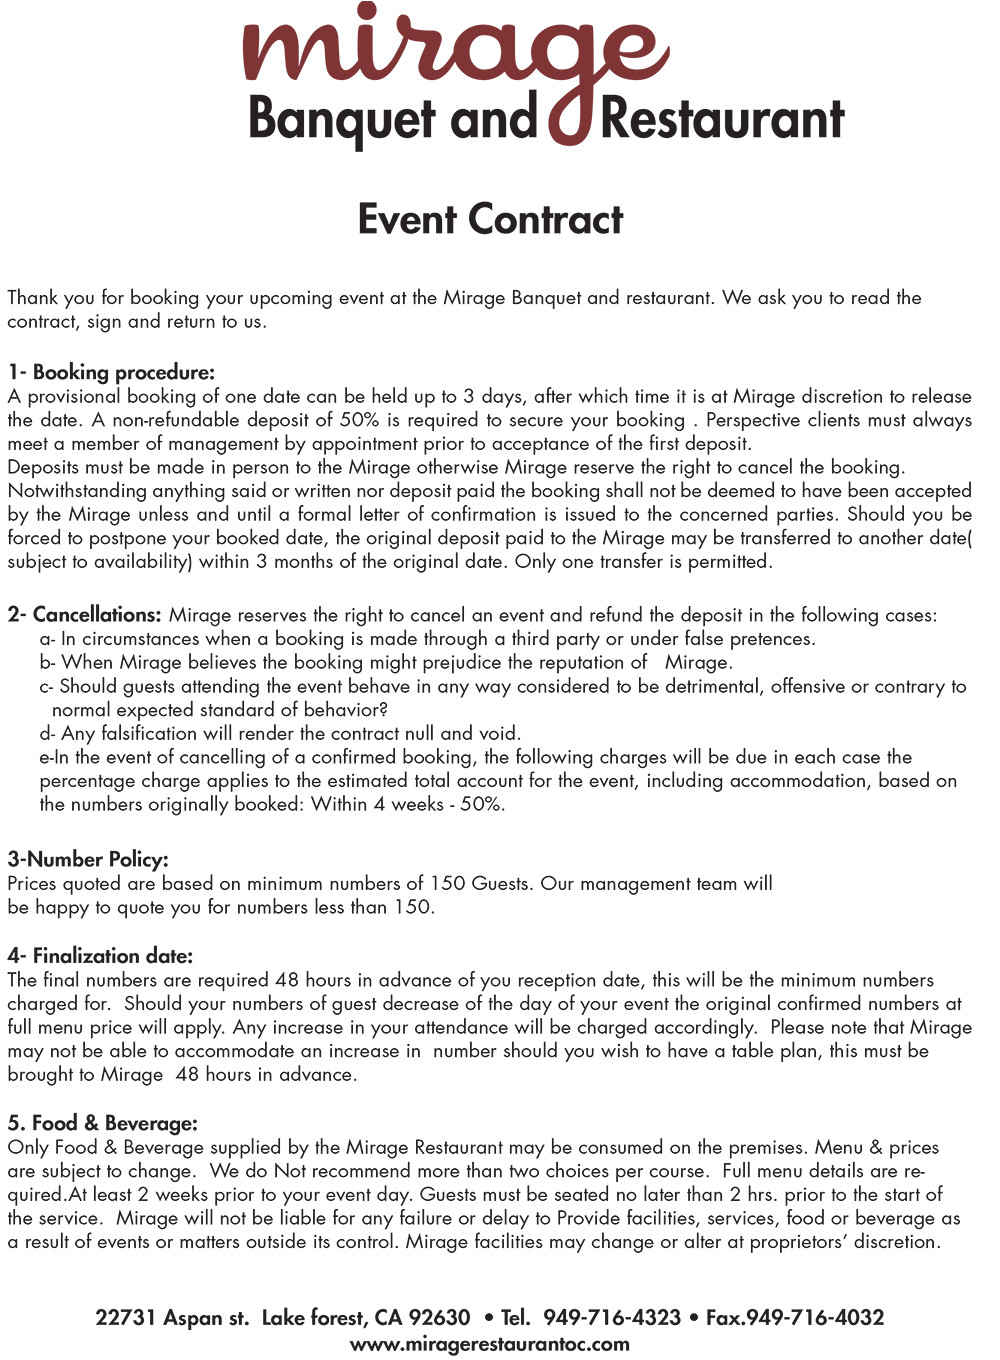 event contract